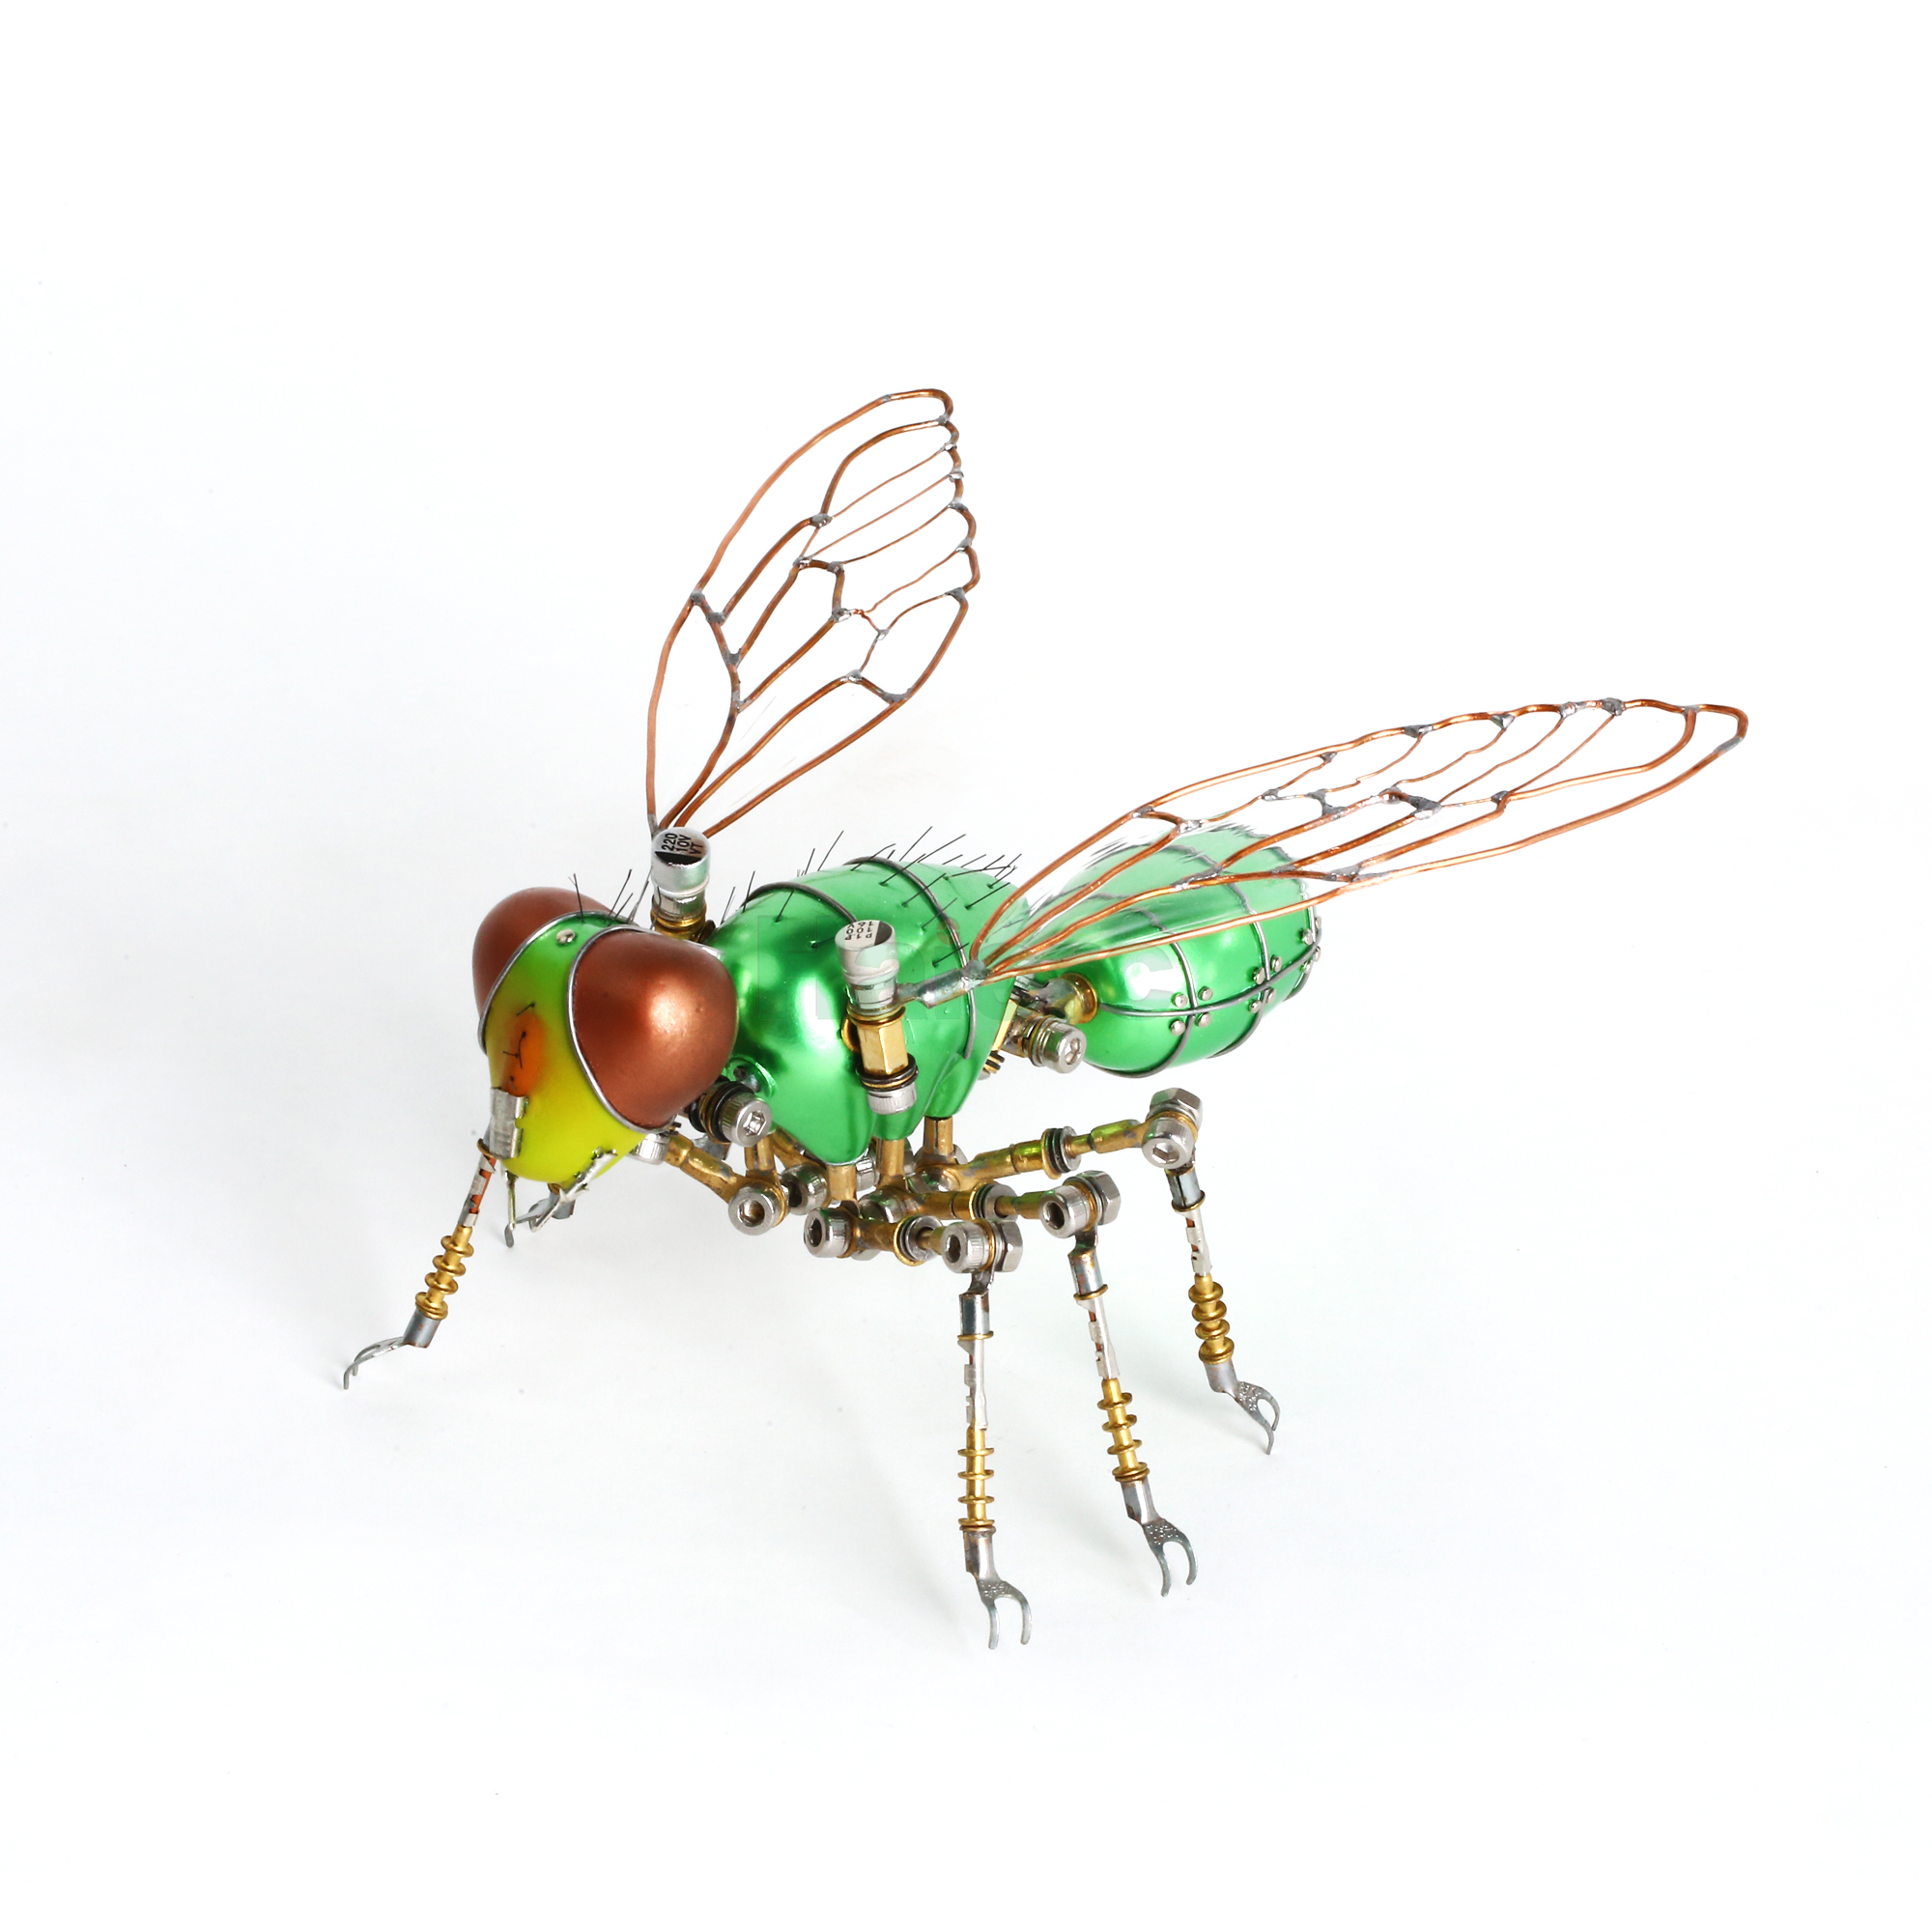 Haierc wholesale Insect mode fly cute spoof solid fly model